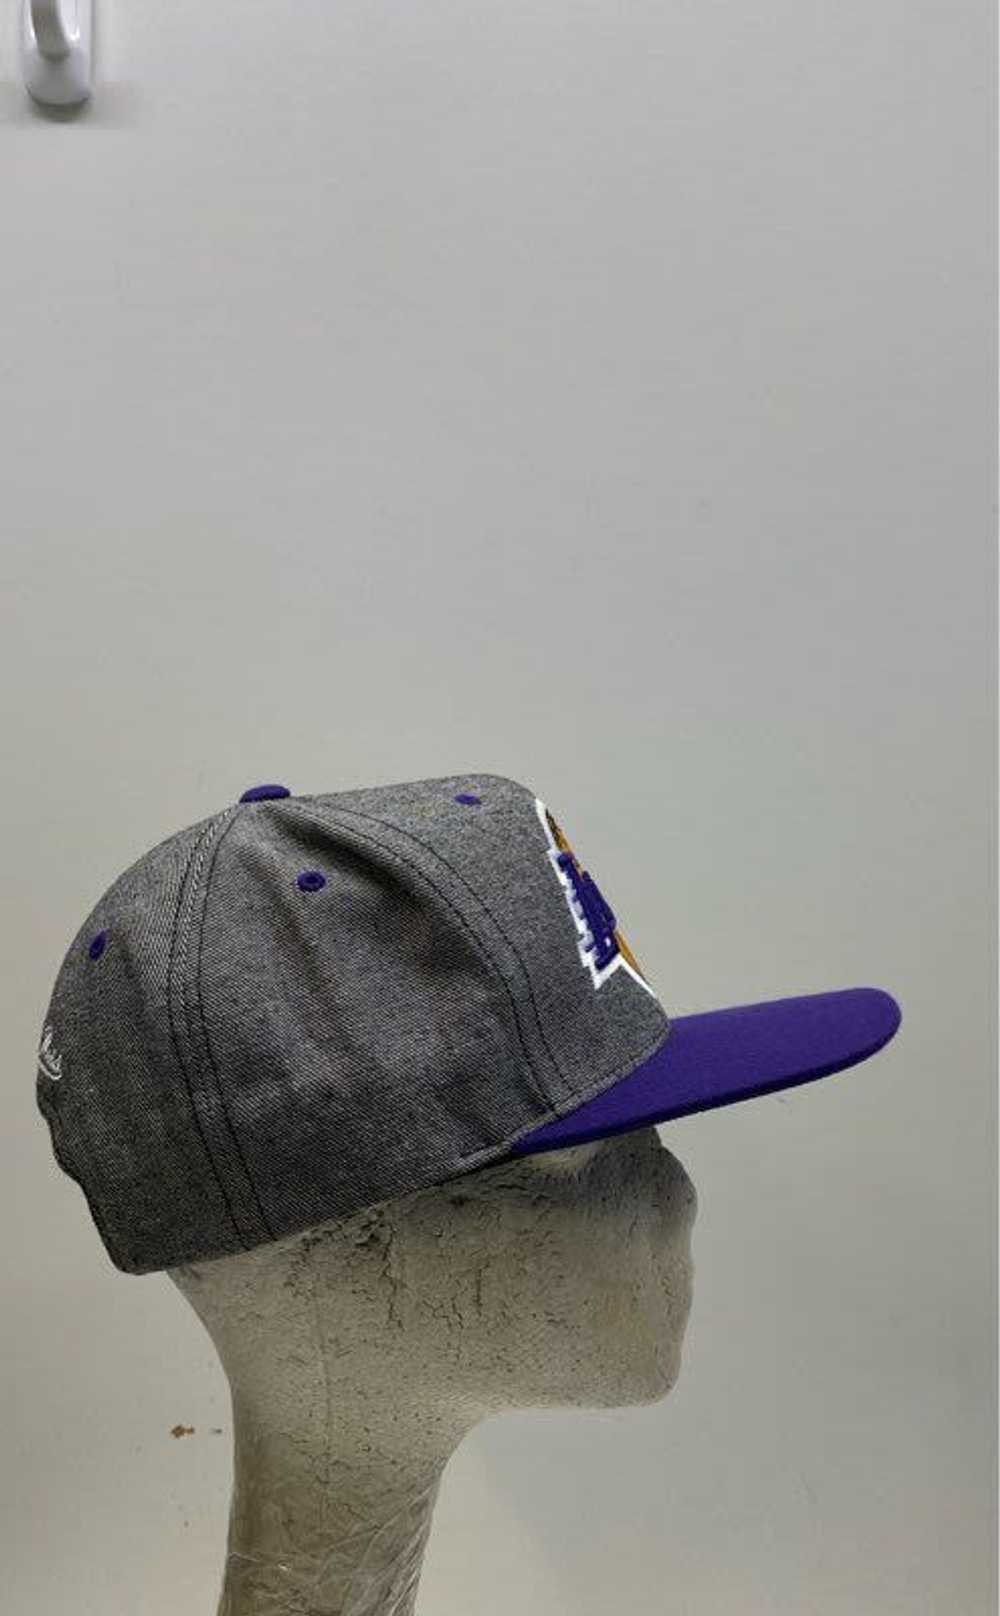 Mitchell & Ness Los Angeles Lakers Snapback Cap - image 3